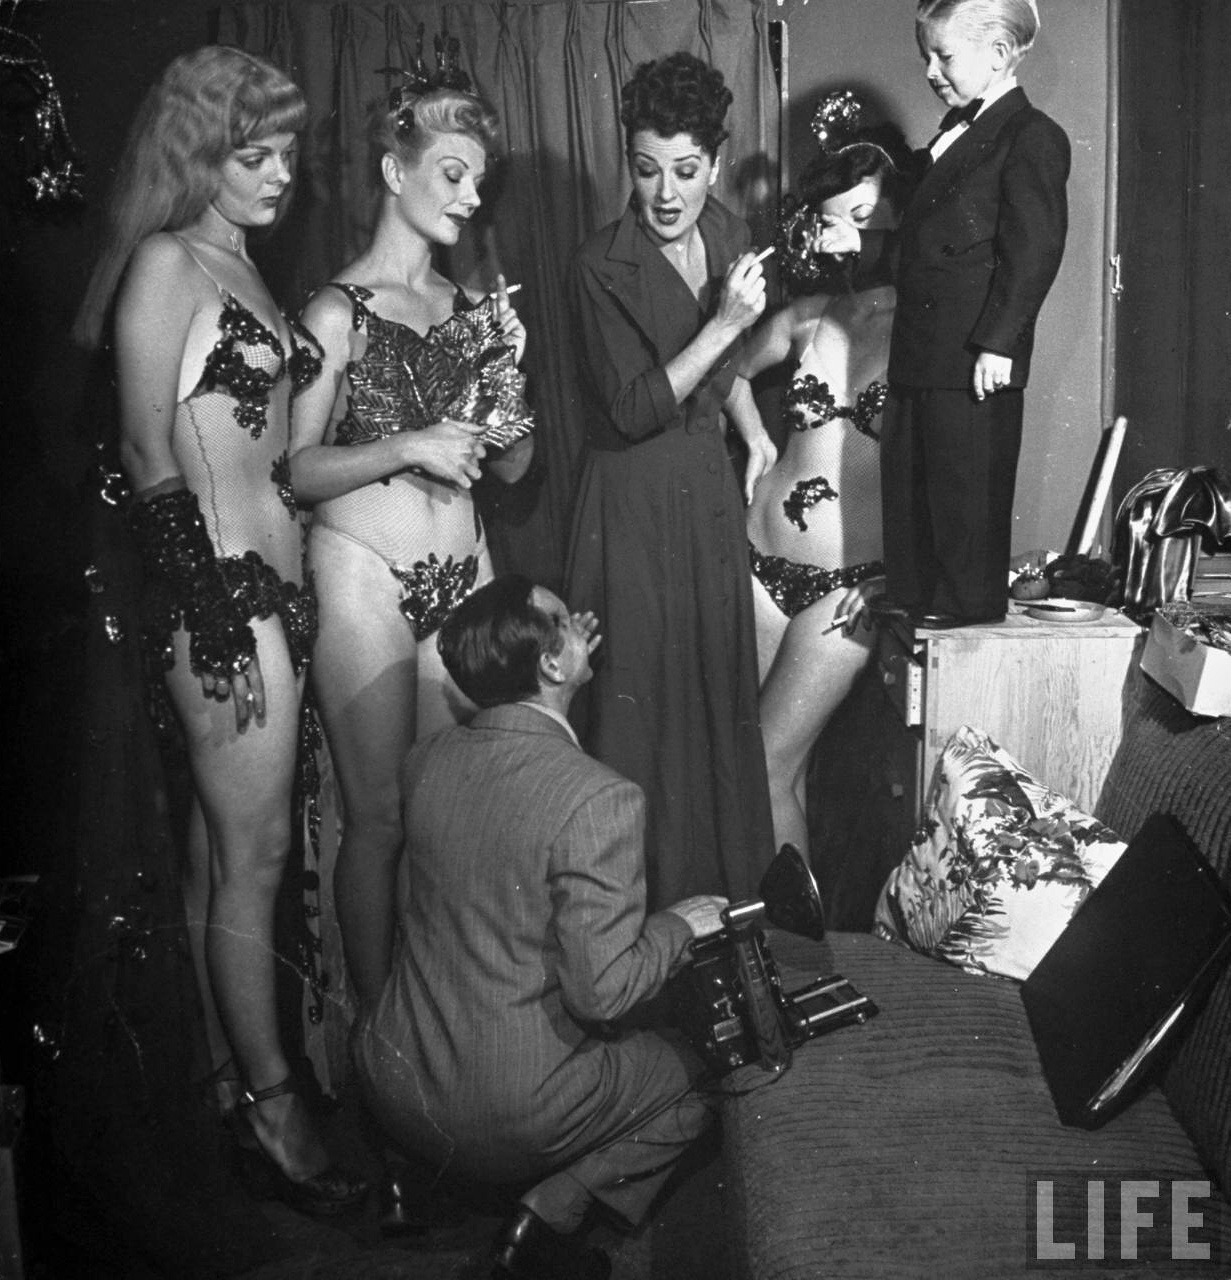 George Skadding - Dancer Gypsy Rose Lee and some of the girls in her show, posing